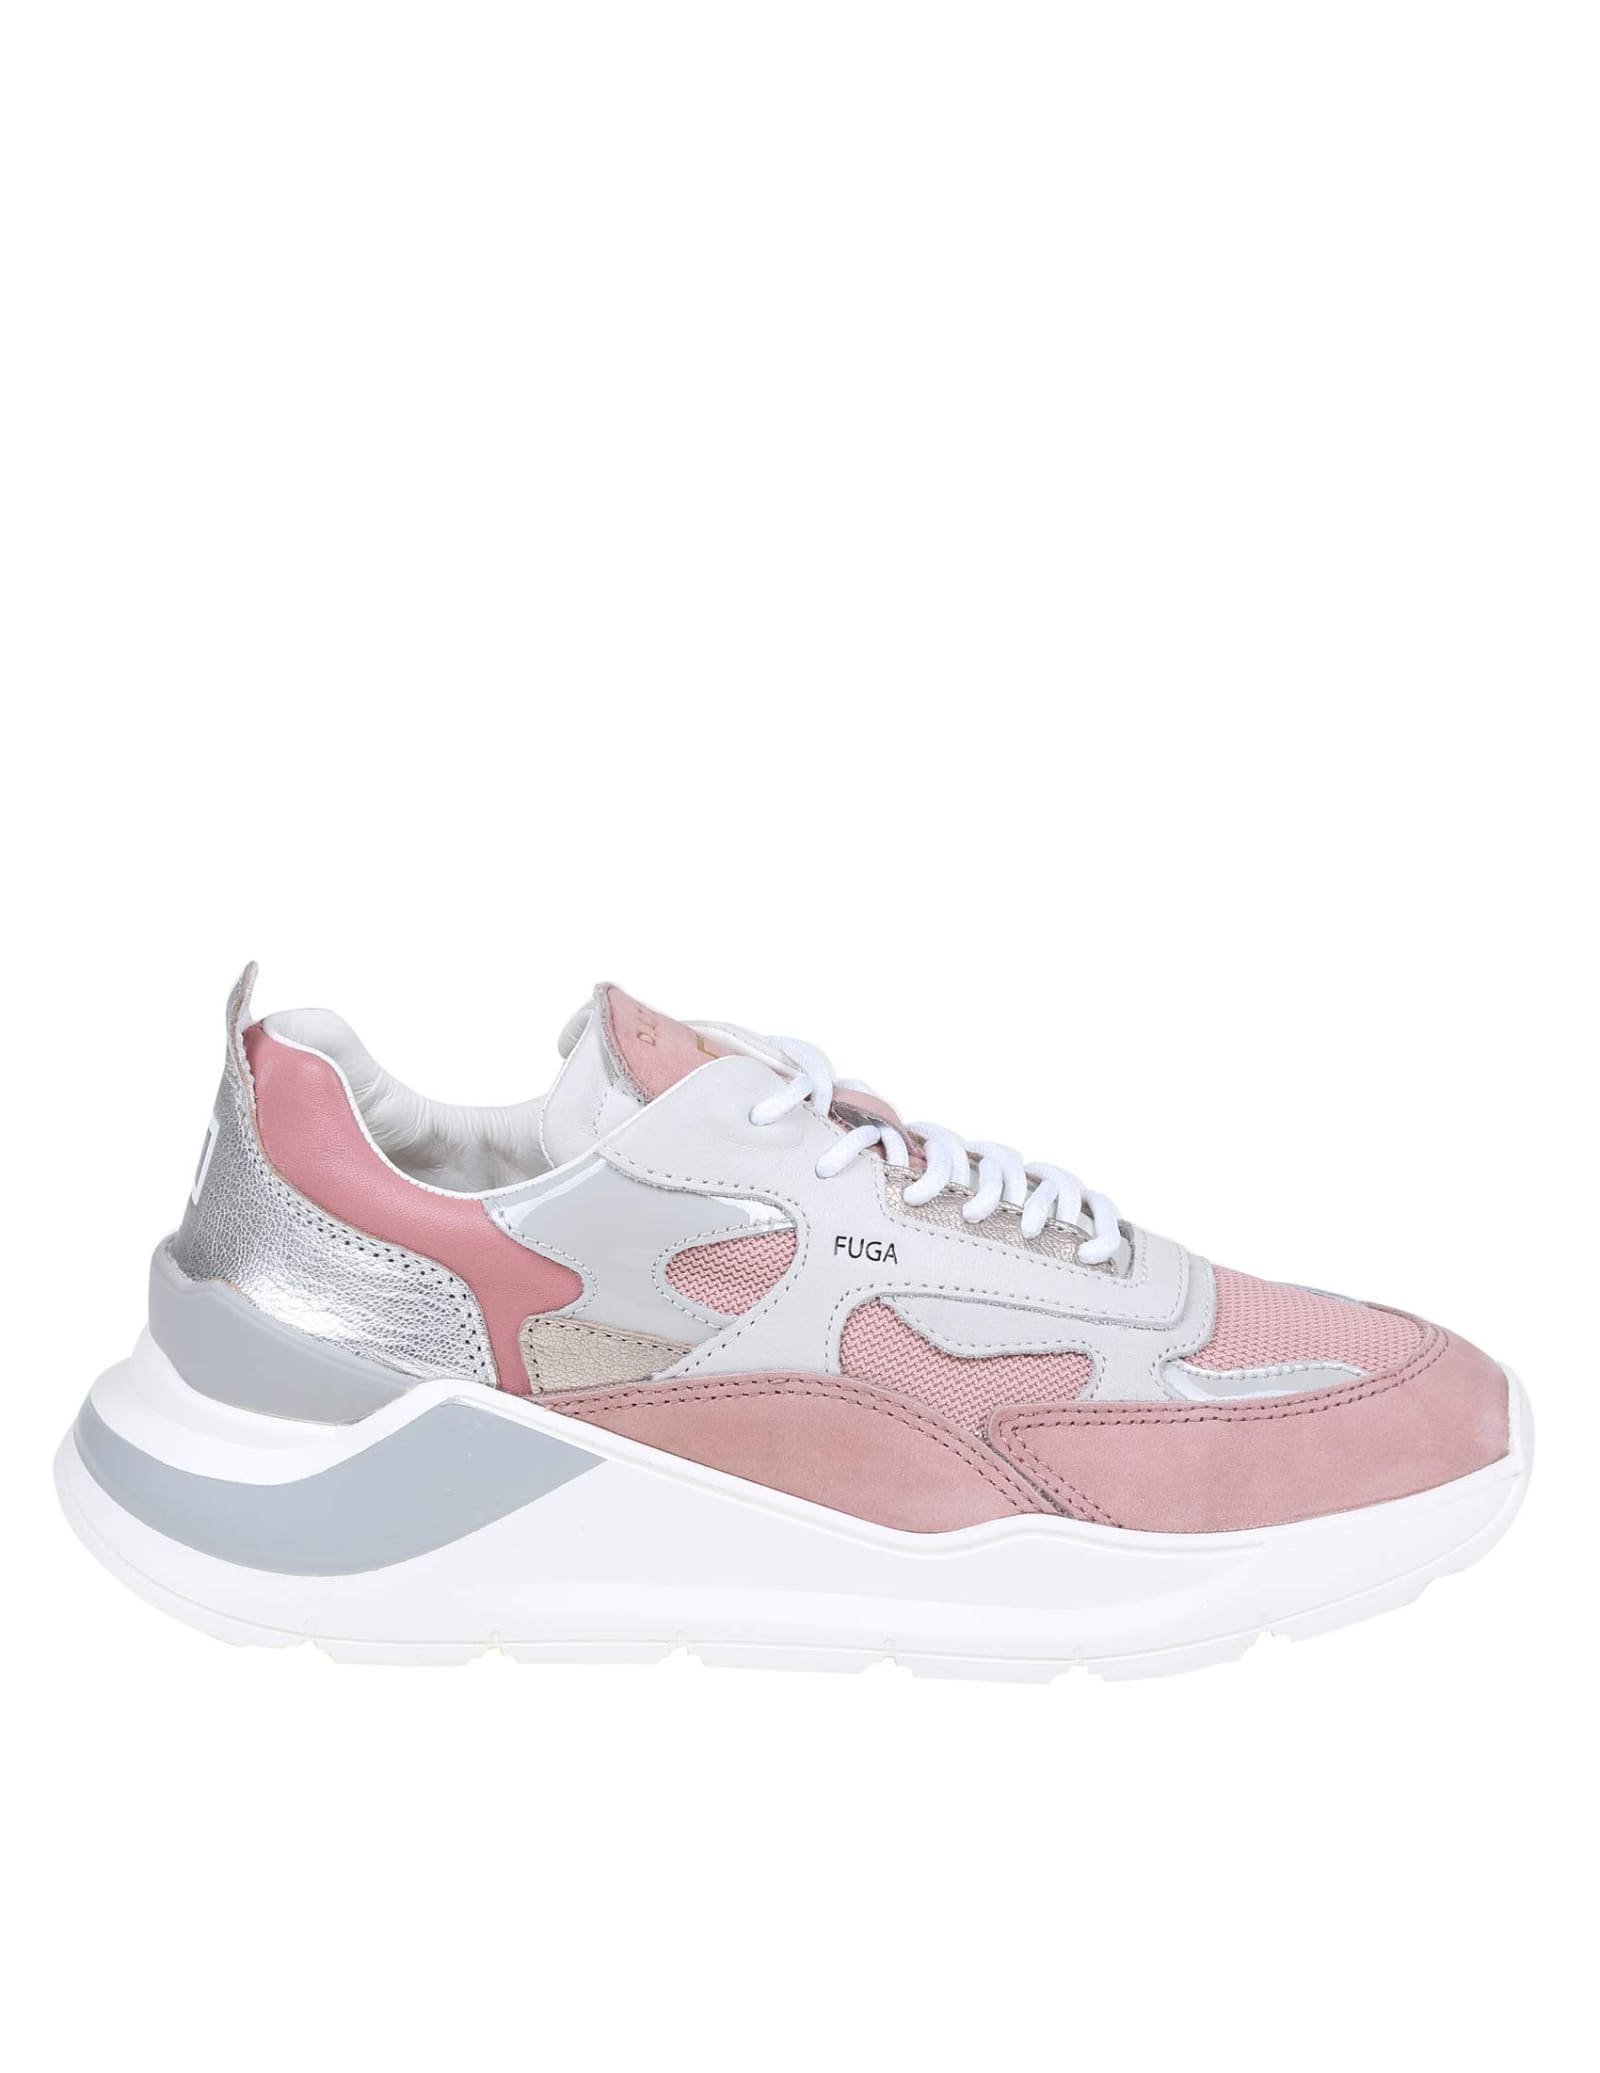 D.A.T.E. Pink Suede Sneakers